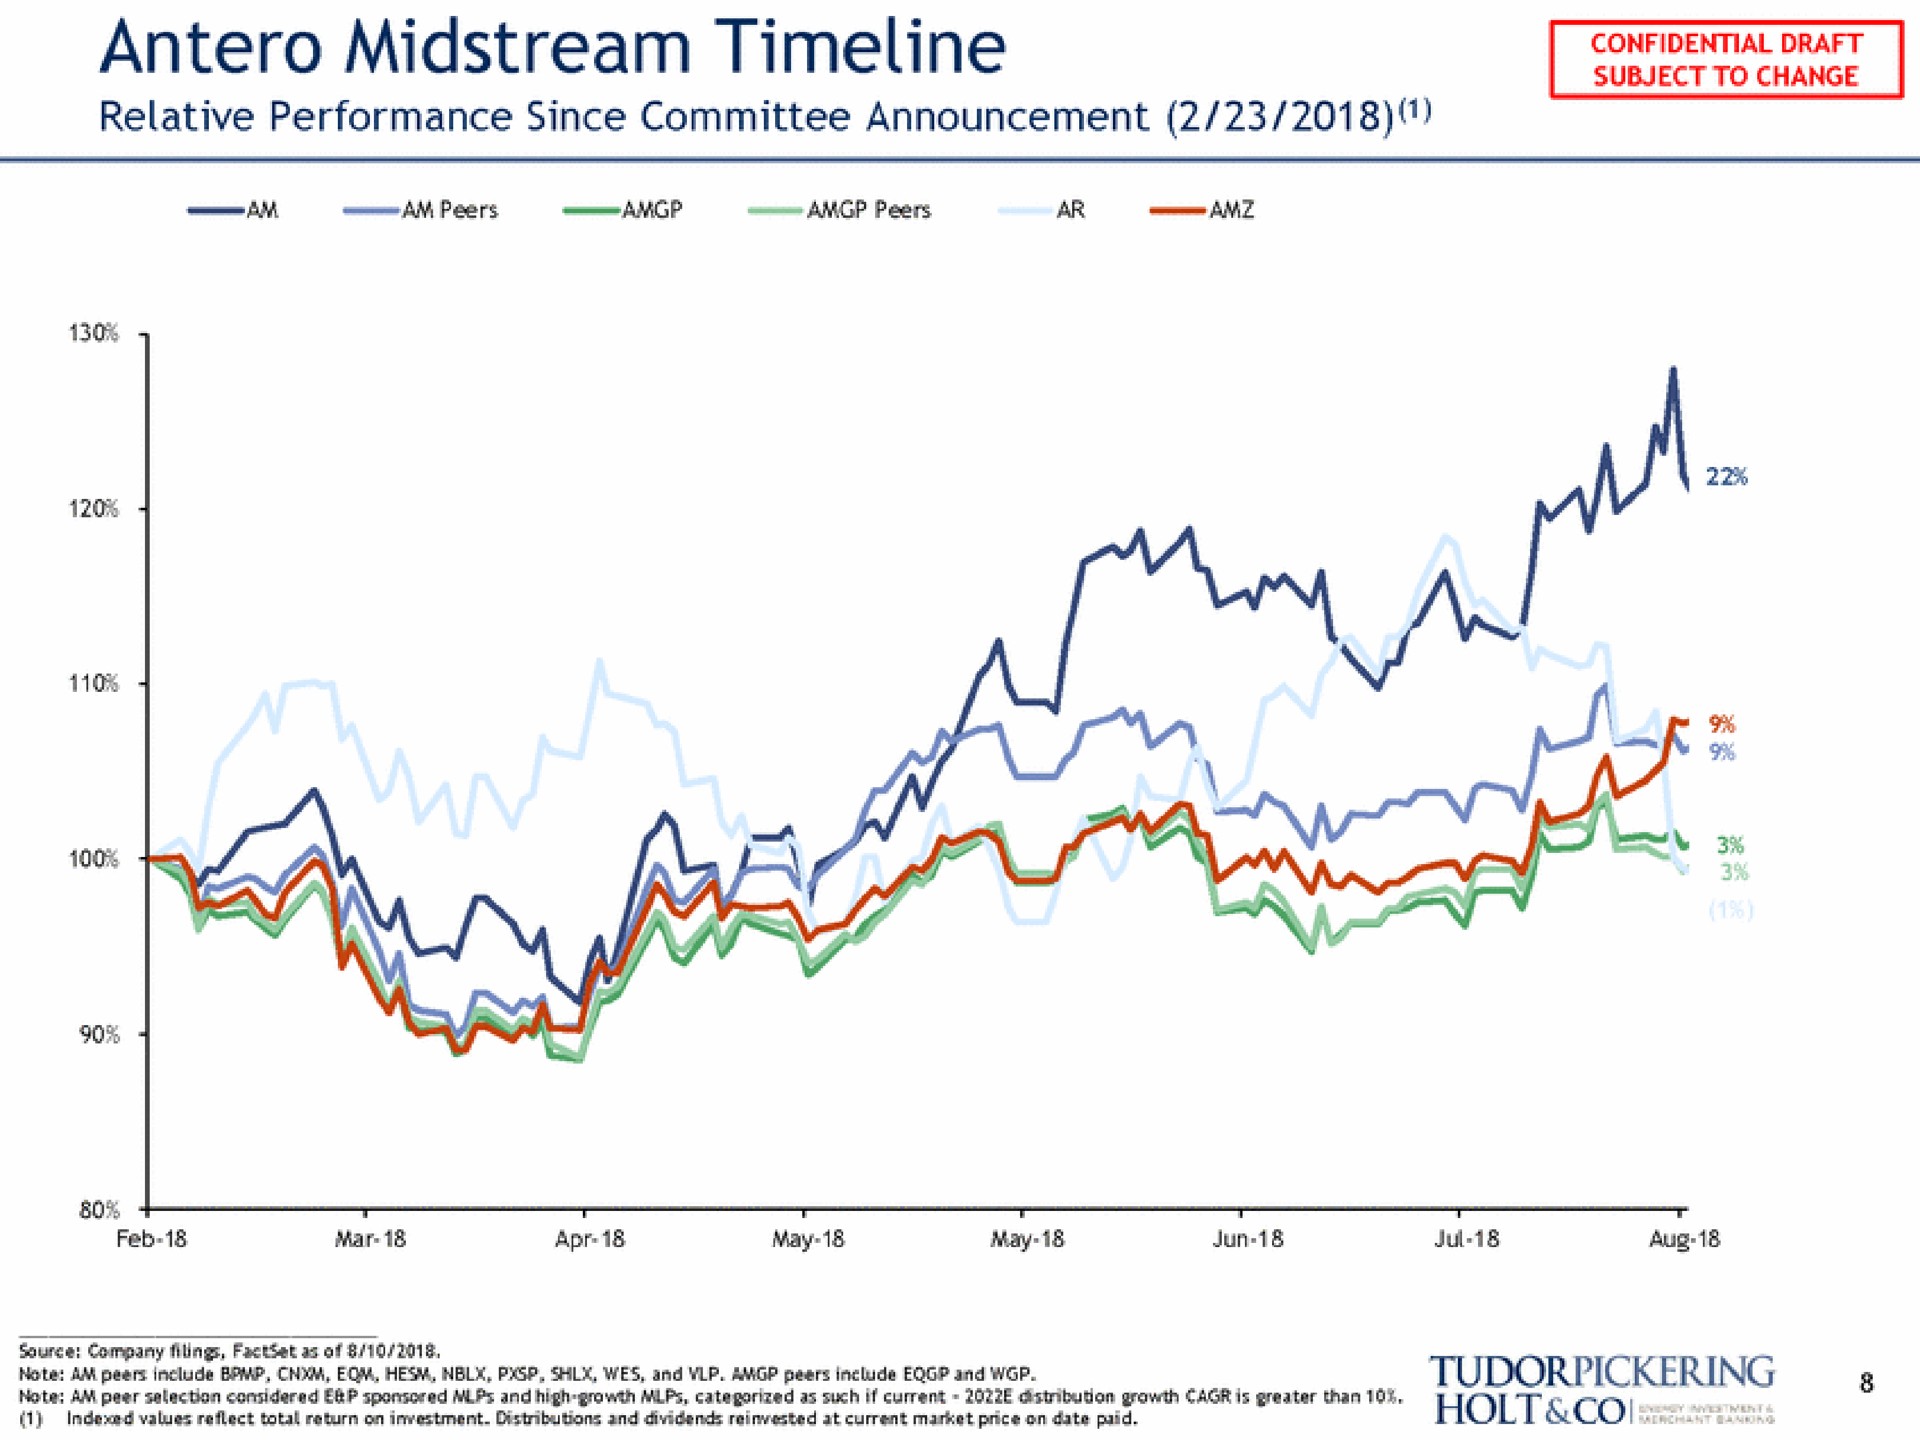 midstream relative performance since committee announcement | Tudor, Pickering, Holt & Co